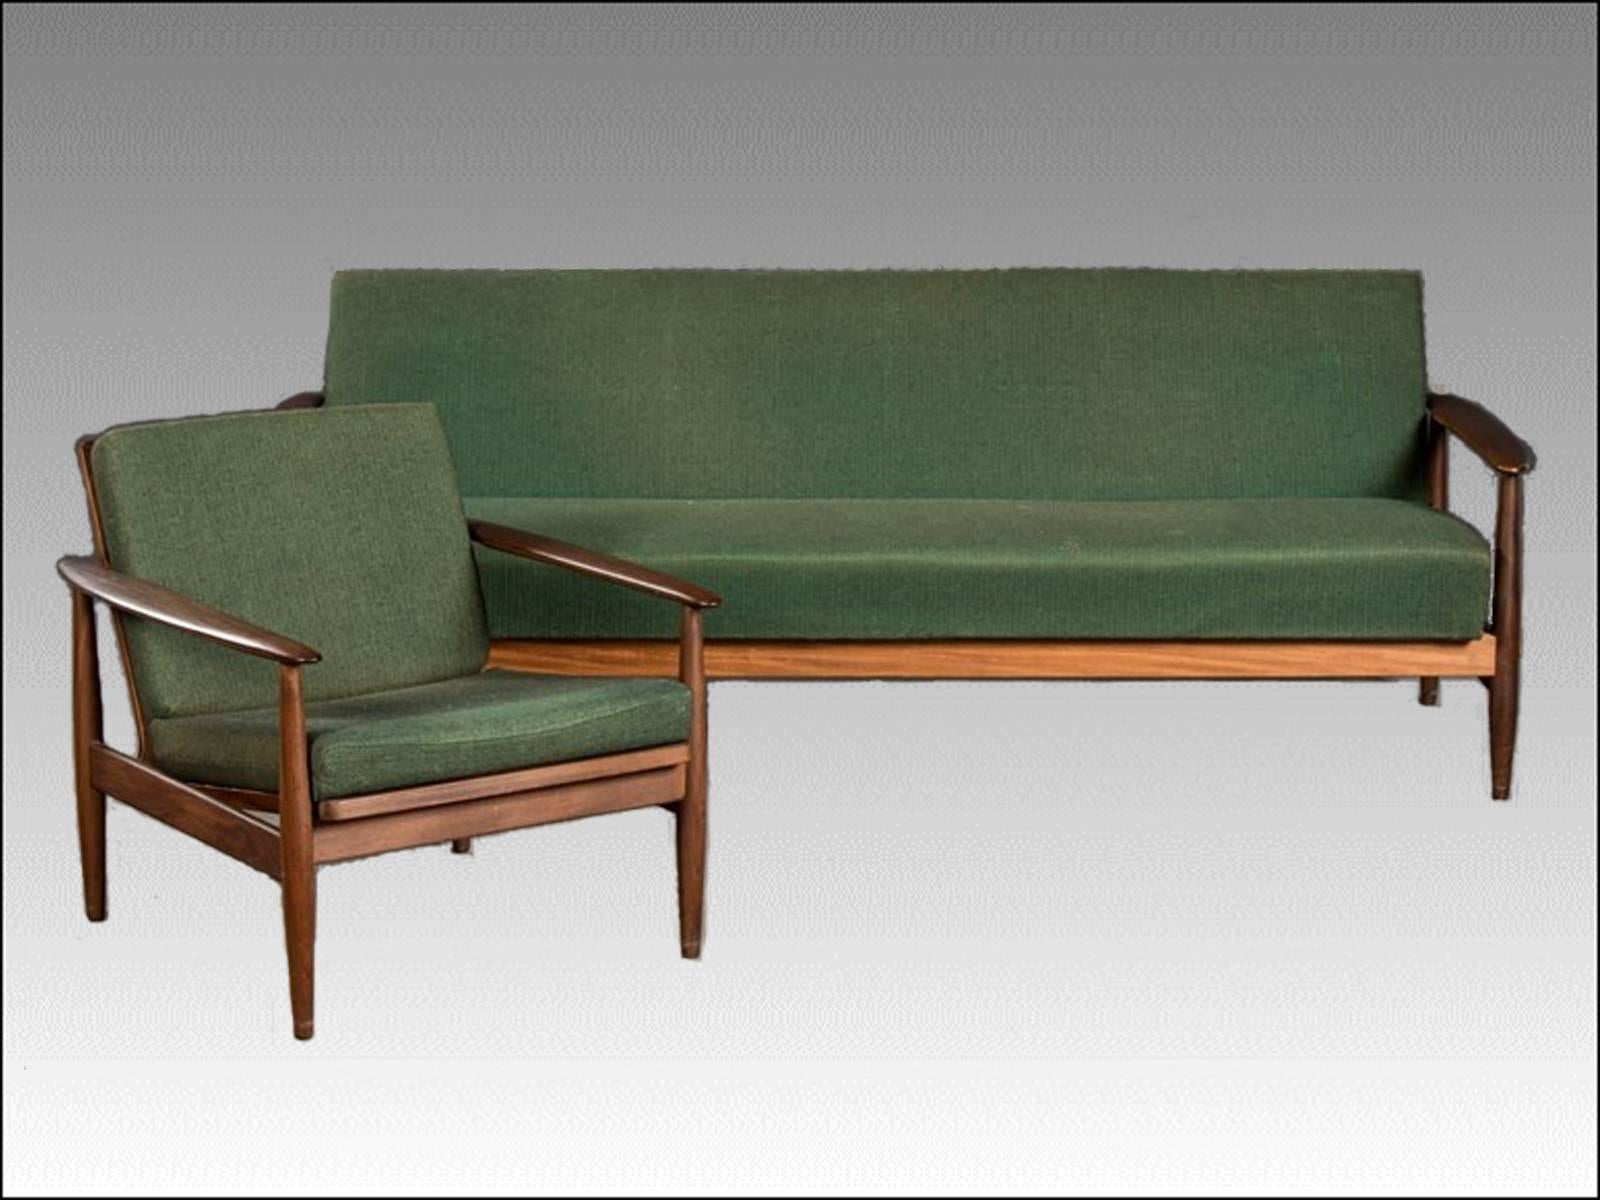 Grethe Jalk style sofabed and armchair from the 1960s in dark teak and dark green fabric upholstery.

Frames of sofabed and armchair and the upholstery on the sofabed is in very good condition. Fabric is old but not original and has some fading as